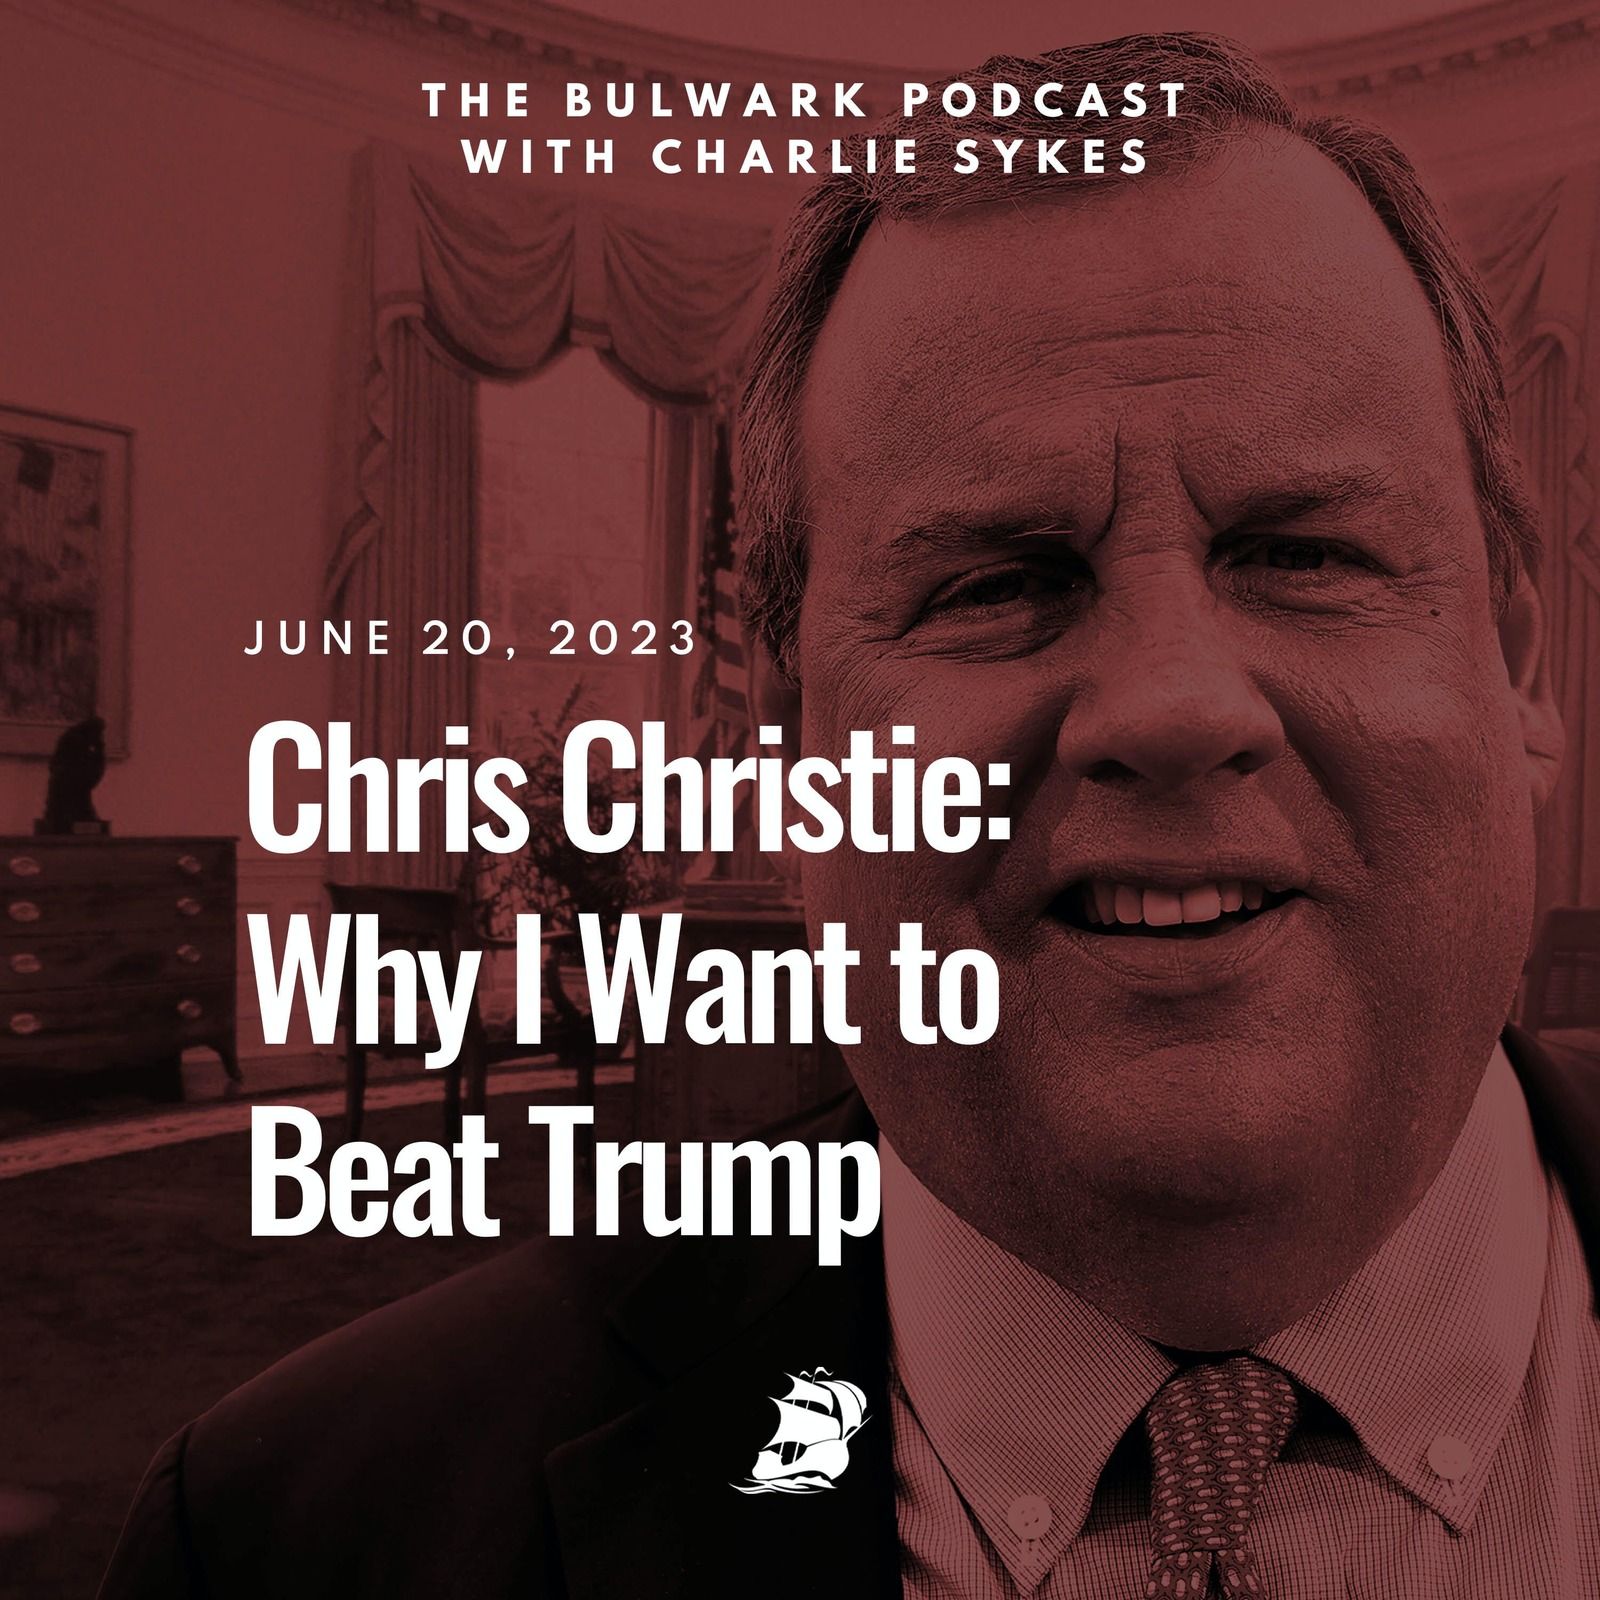 Chris Christie: Why I Want to Beat Trump